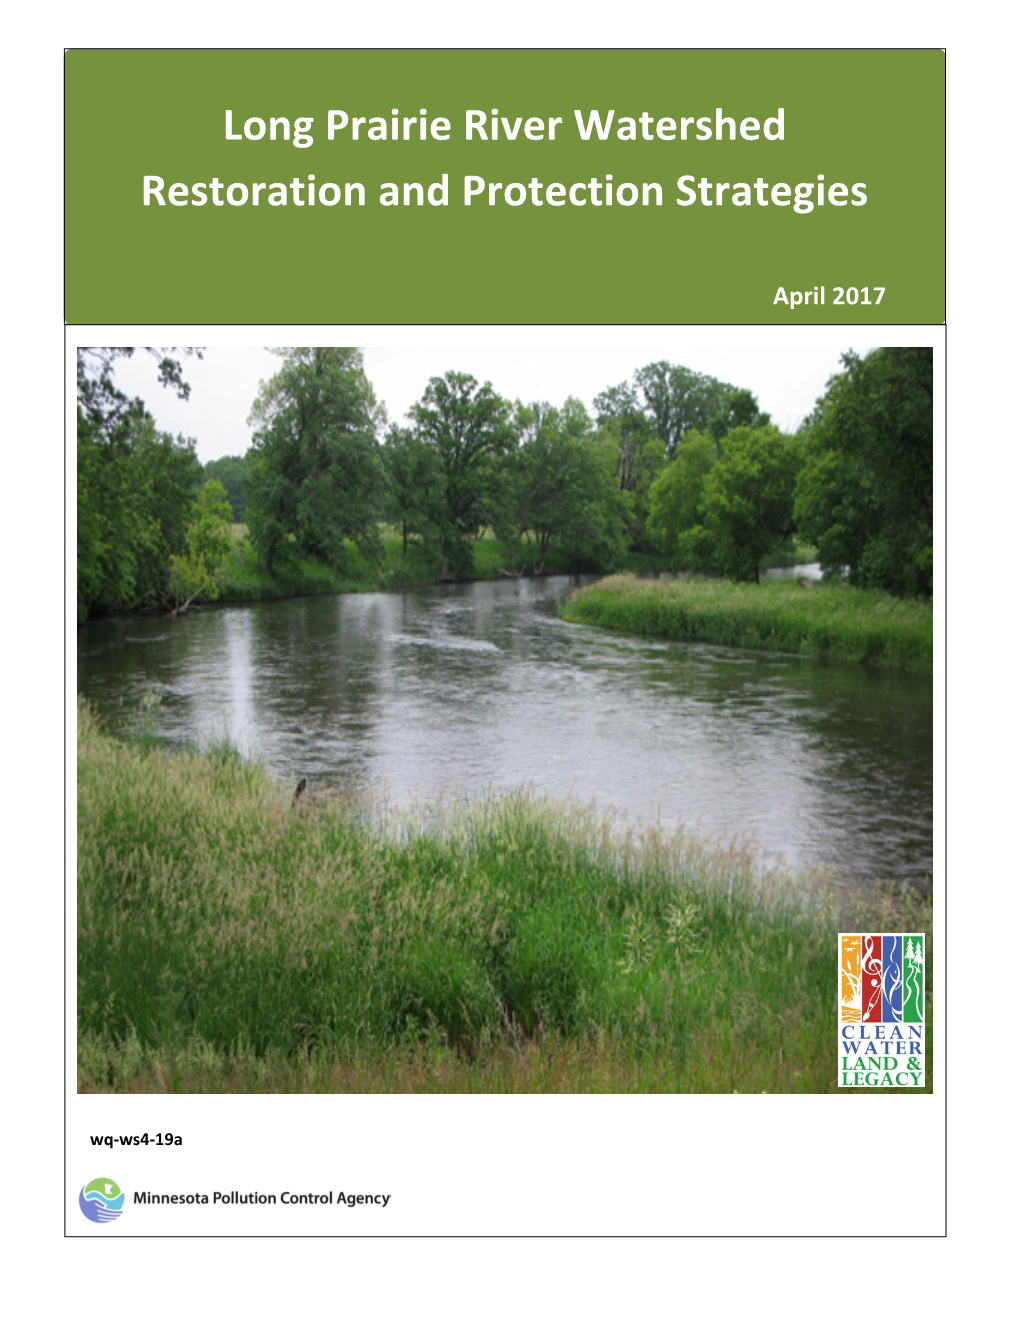 Long Prairie River Watershed Restoration and Protection Strategies